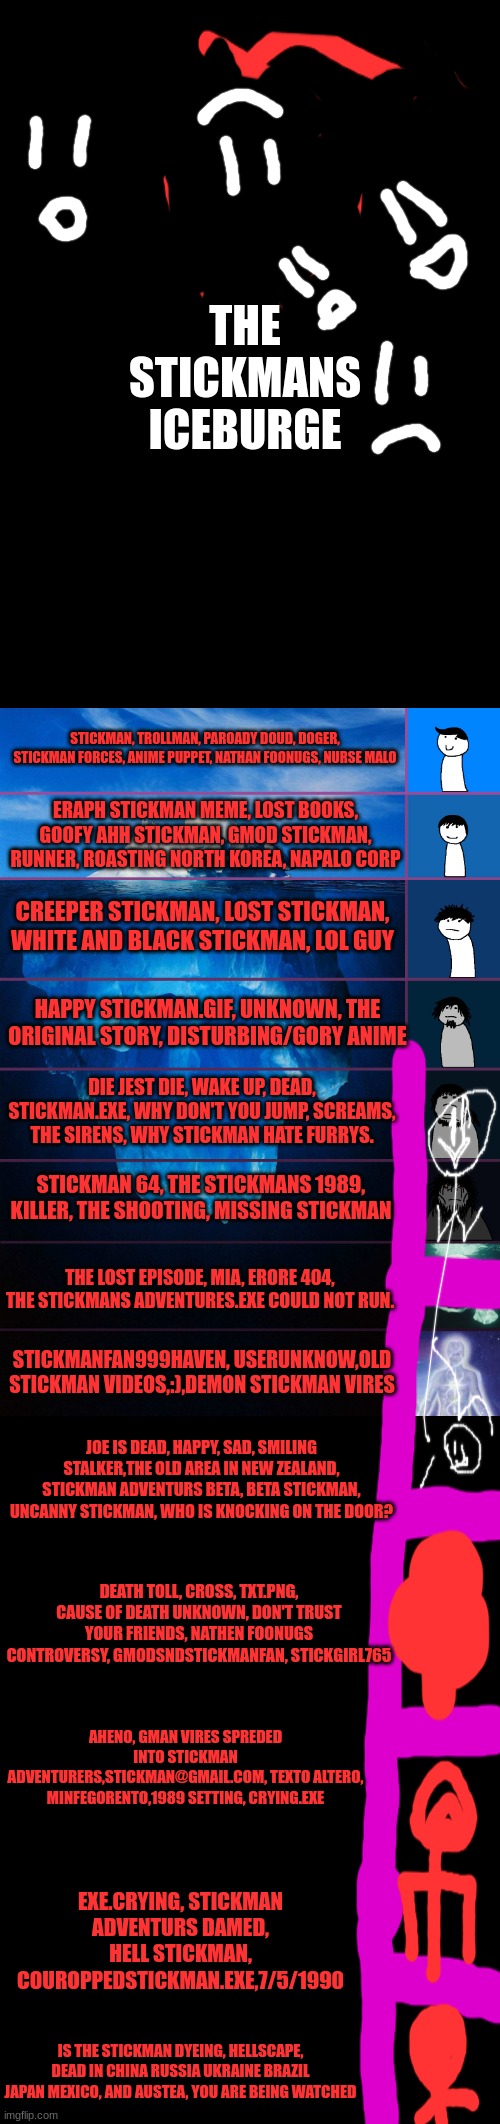 THE STICKMAN ICEBURGESOME RANDOME THING I DID :D(SOME GOREY STUFF MAY BE USED IN THIS) | THE STICKMANS ICEBURGE; STICKMAN, TROLLMAN, PAROADY DOUD, DOGER, STICKMAN FORCES, ANIME PUPPET, NATHAN FOONUGS, NURSE MALO; ERAPH STICKMAN MEME, LOST BOOKS, GOOFY AHH STICKMAN, GMOD STICKMAN, RUNNER, ROASTING NORTH KOREA, NAPALO CORP; CREEPER STICKMAN, LOST STICKMAN, WHITE AND BLACK STICKMAN, LOL GUY; HAPPY STICKMAN.GIF, UNKNOWN, THE ORIGINAL STORY, DISTURBING/GORY ANIME; DIE JEST DIE, WAKE UP, DEAD, STICKMAN.EXE, WHY DON'T YOU JUMP, SCREAMS, THE SIRENS, WHY STICKMAN HATE FURRYS. STICKMAN 64, THE STICKMANS 1989, KILLER, THE SHOOTING, MISSING STICKMAN; THE LOST EPISODE, MIA, ERORE 404, THE STICKMANS ADVENTURES.EXE COULD NOT RUN. STICKMANFAN999HAVEN, USERUNKNOW,OLD STICKMAN VIDEOS,:),DEMON STICKMAN VIRES; JOE IS DEAD, HAPPY, SAD, SMILING STALKER,THE OLD AREA IN NEW ZEALAND, STICKMAN ADVENTURS BETA, BETA STICKMAN, UNCANNY STICKMAN, WHO IS KNOCKING ON THE DOOR? DEATH TOLL, CROSS, TXT.PNG, CAUSE OF DEATH UNKNOWN, DON'T TRUST YOUR FRIENDS, NATHEN FOONUGS CONTROVERSY, GMODSNDSTICKMANFAN, STICKGIRL765; AHENO, GMAN VIRES SPREDED INTO STICKMAN ADVENTURERS,STICKMAN@GMAIL.COM, TEXTO ALTERO, MINFEGORENTO,1989 SETTING, CRYING.EXE; EXE.CRYING, STICKMAN ADVENTURS DAMED, HELL STICKMAN, COUROPPEDSTICKMAN.EXE,7/5/1990; IS THE STICKMAN DYEING, HELLSCAPE, DEAD IN CHINA RUSSIA UKRAINE BRAZIL JAPAN MEXICO, AND AUSTEA, YOU ARE BEING WATCHED | image tagged in iceberg levels tiers | made w/ Imgflip meme maker